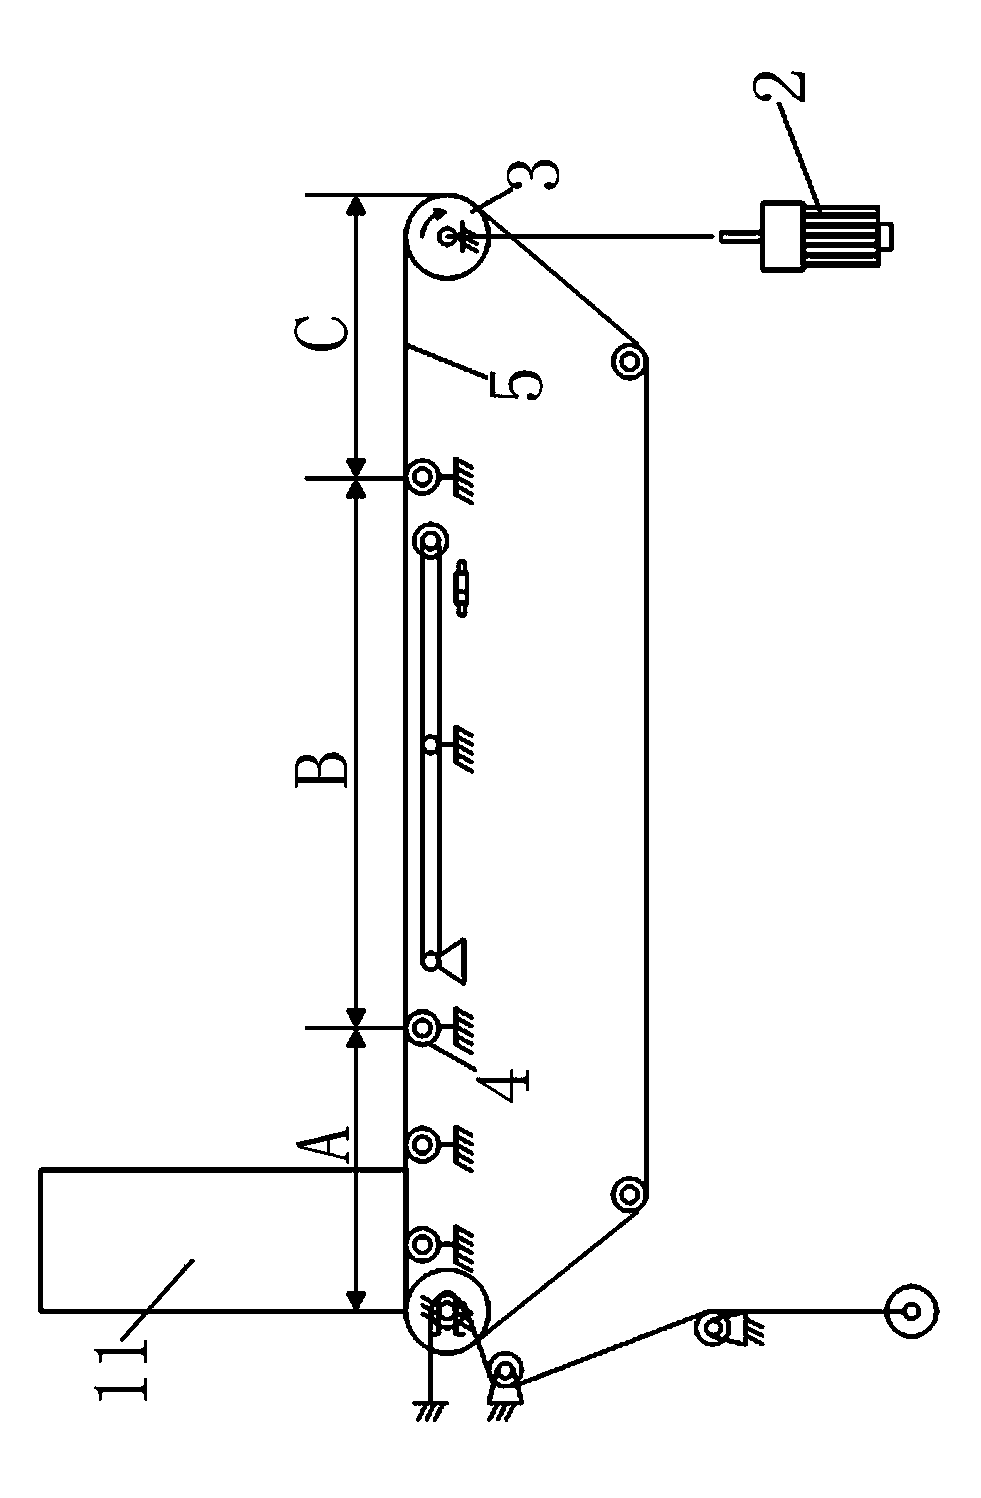 Electronic scale outlet balance flow control method